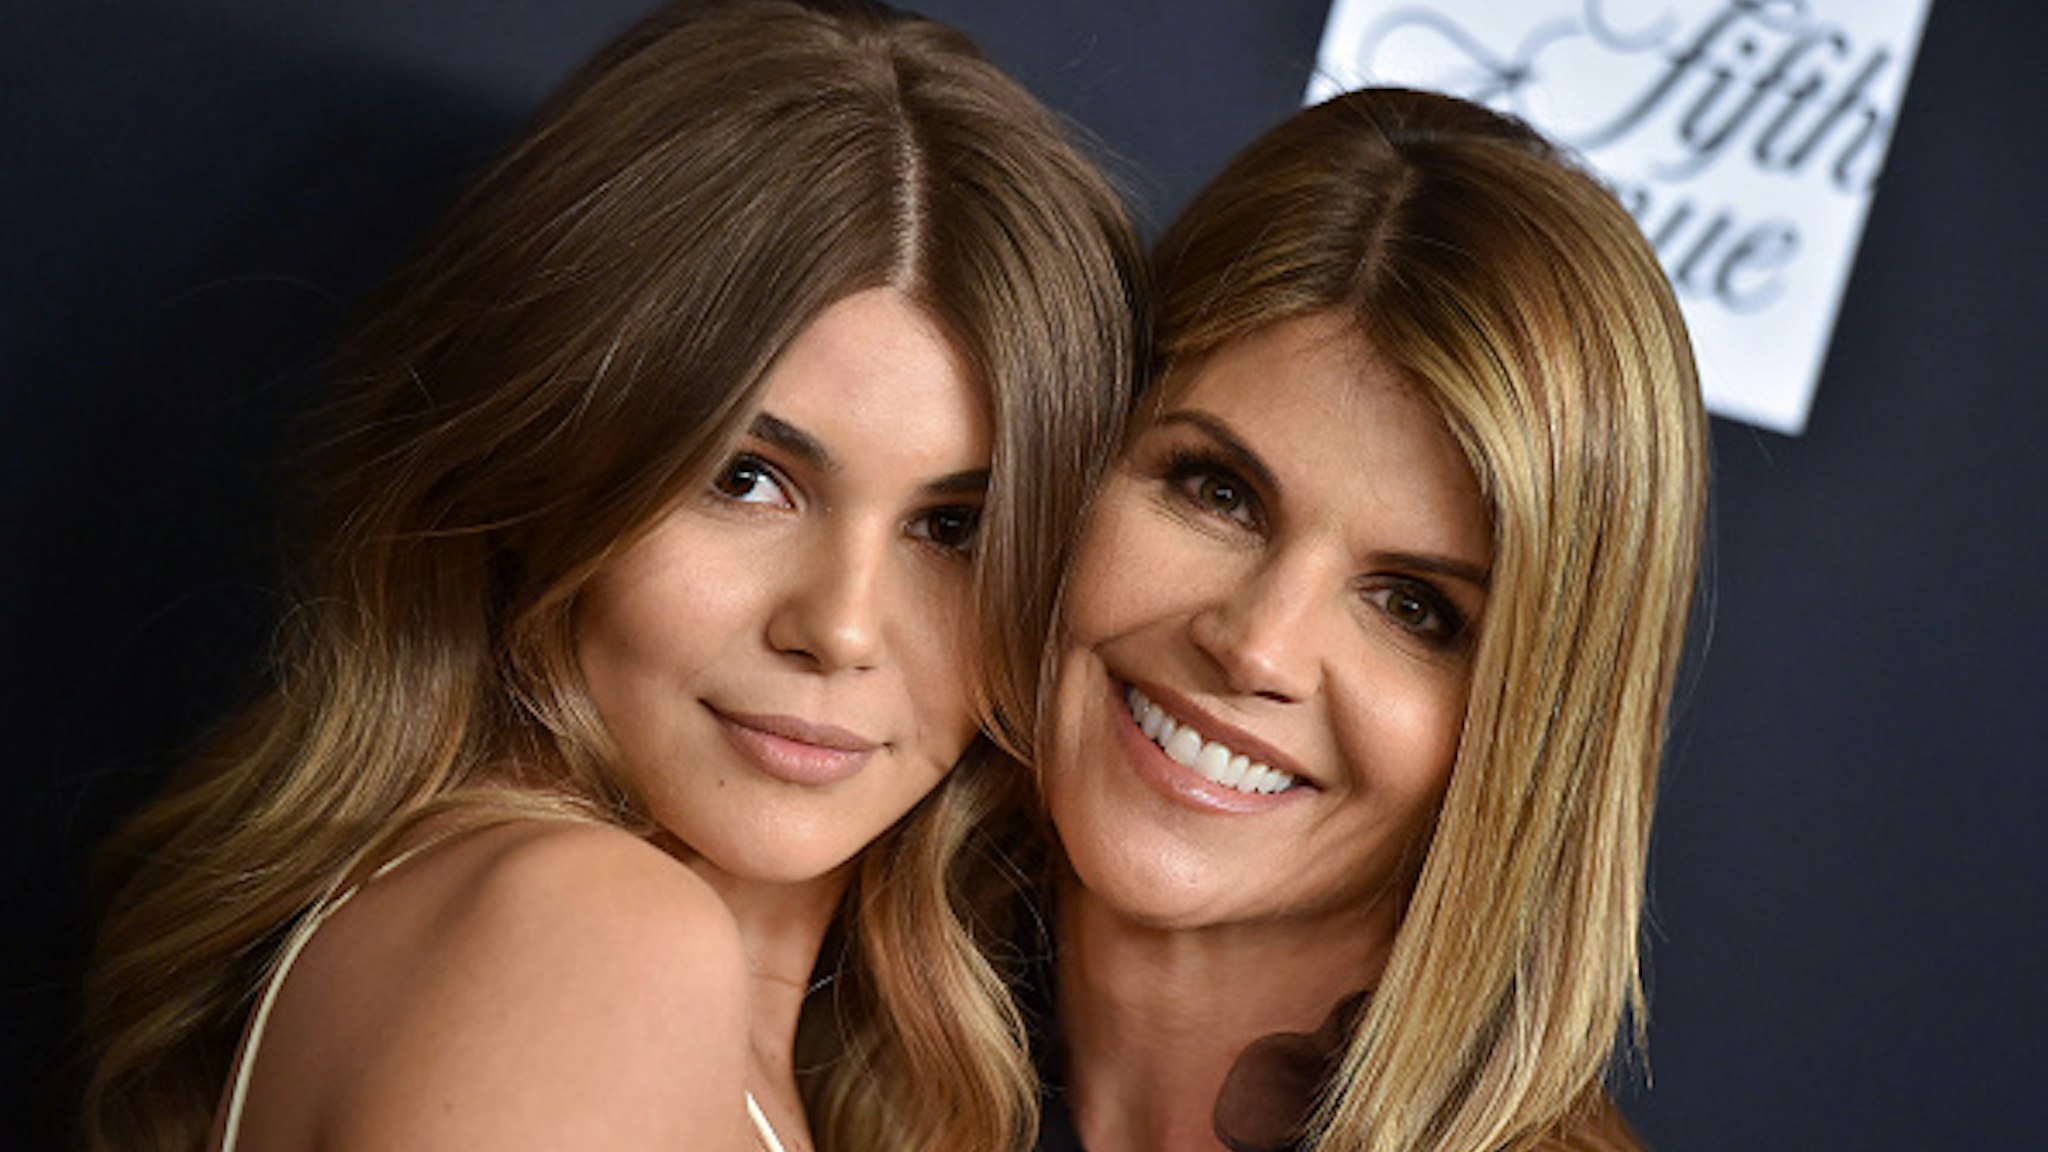 BEVERLY HILLS, CA - FEBRUARY 27: Actress Lori Loughlin and daughter Olivia Jade Giannulli attend Women's Cancer Research Fund's An Unforgettable Evening Benefit Gala at the Beverly Wilshire Four Seasons Hotel on February 27, 2018 in Beverly Hills, California.